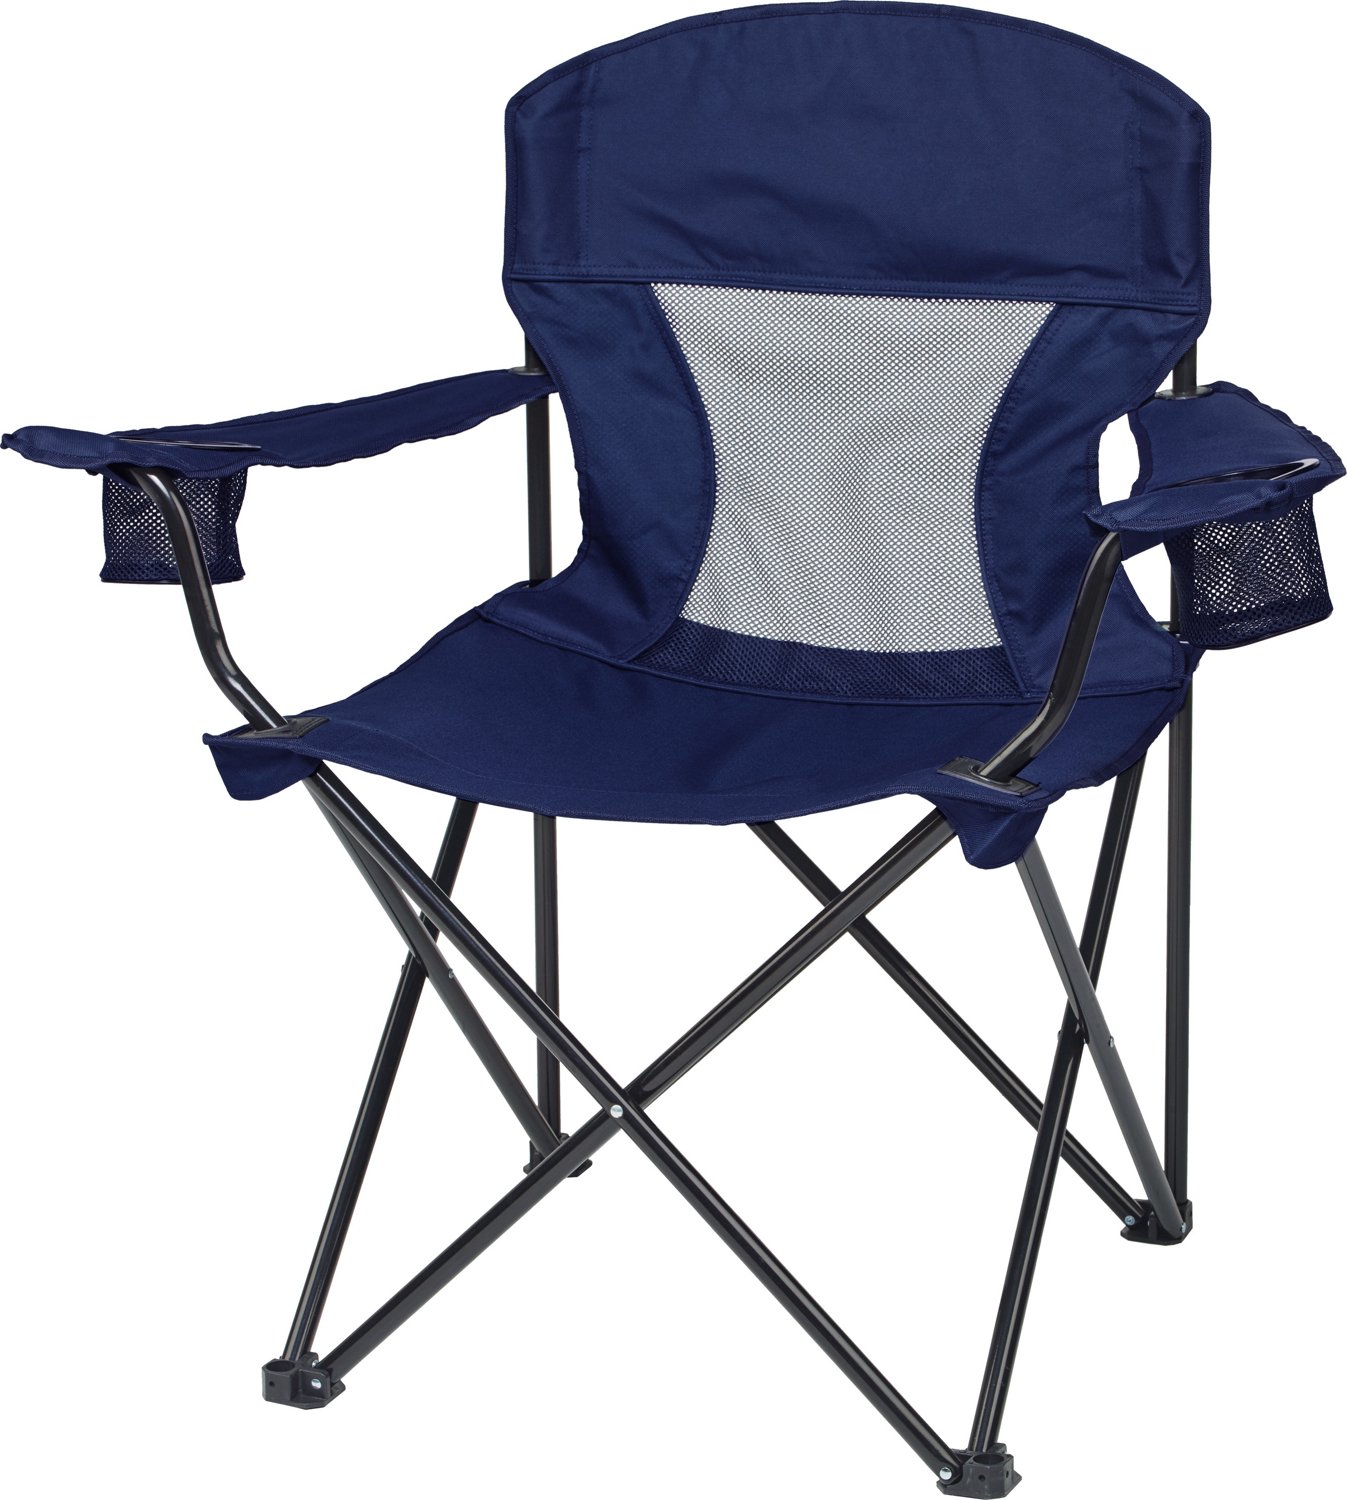 academy camping chairs